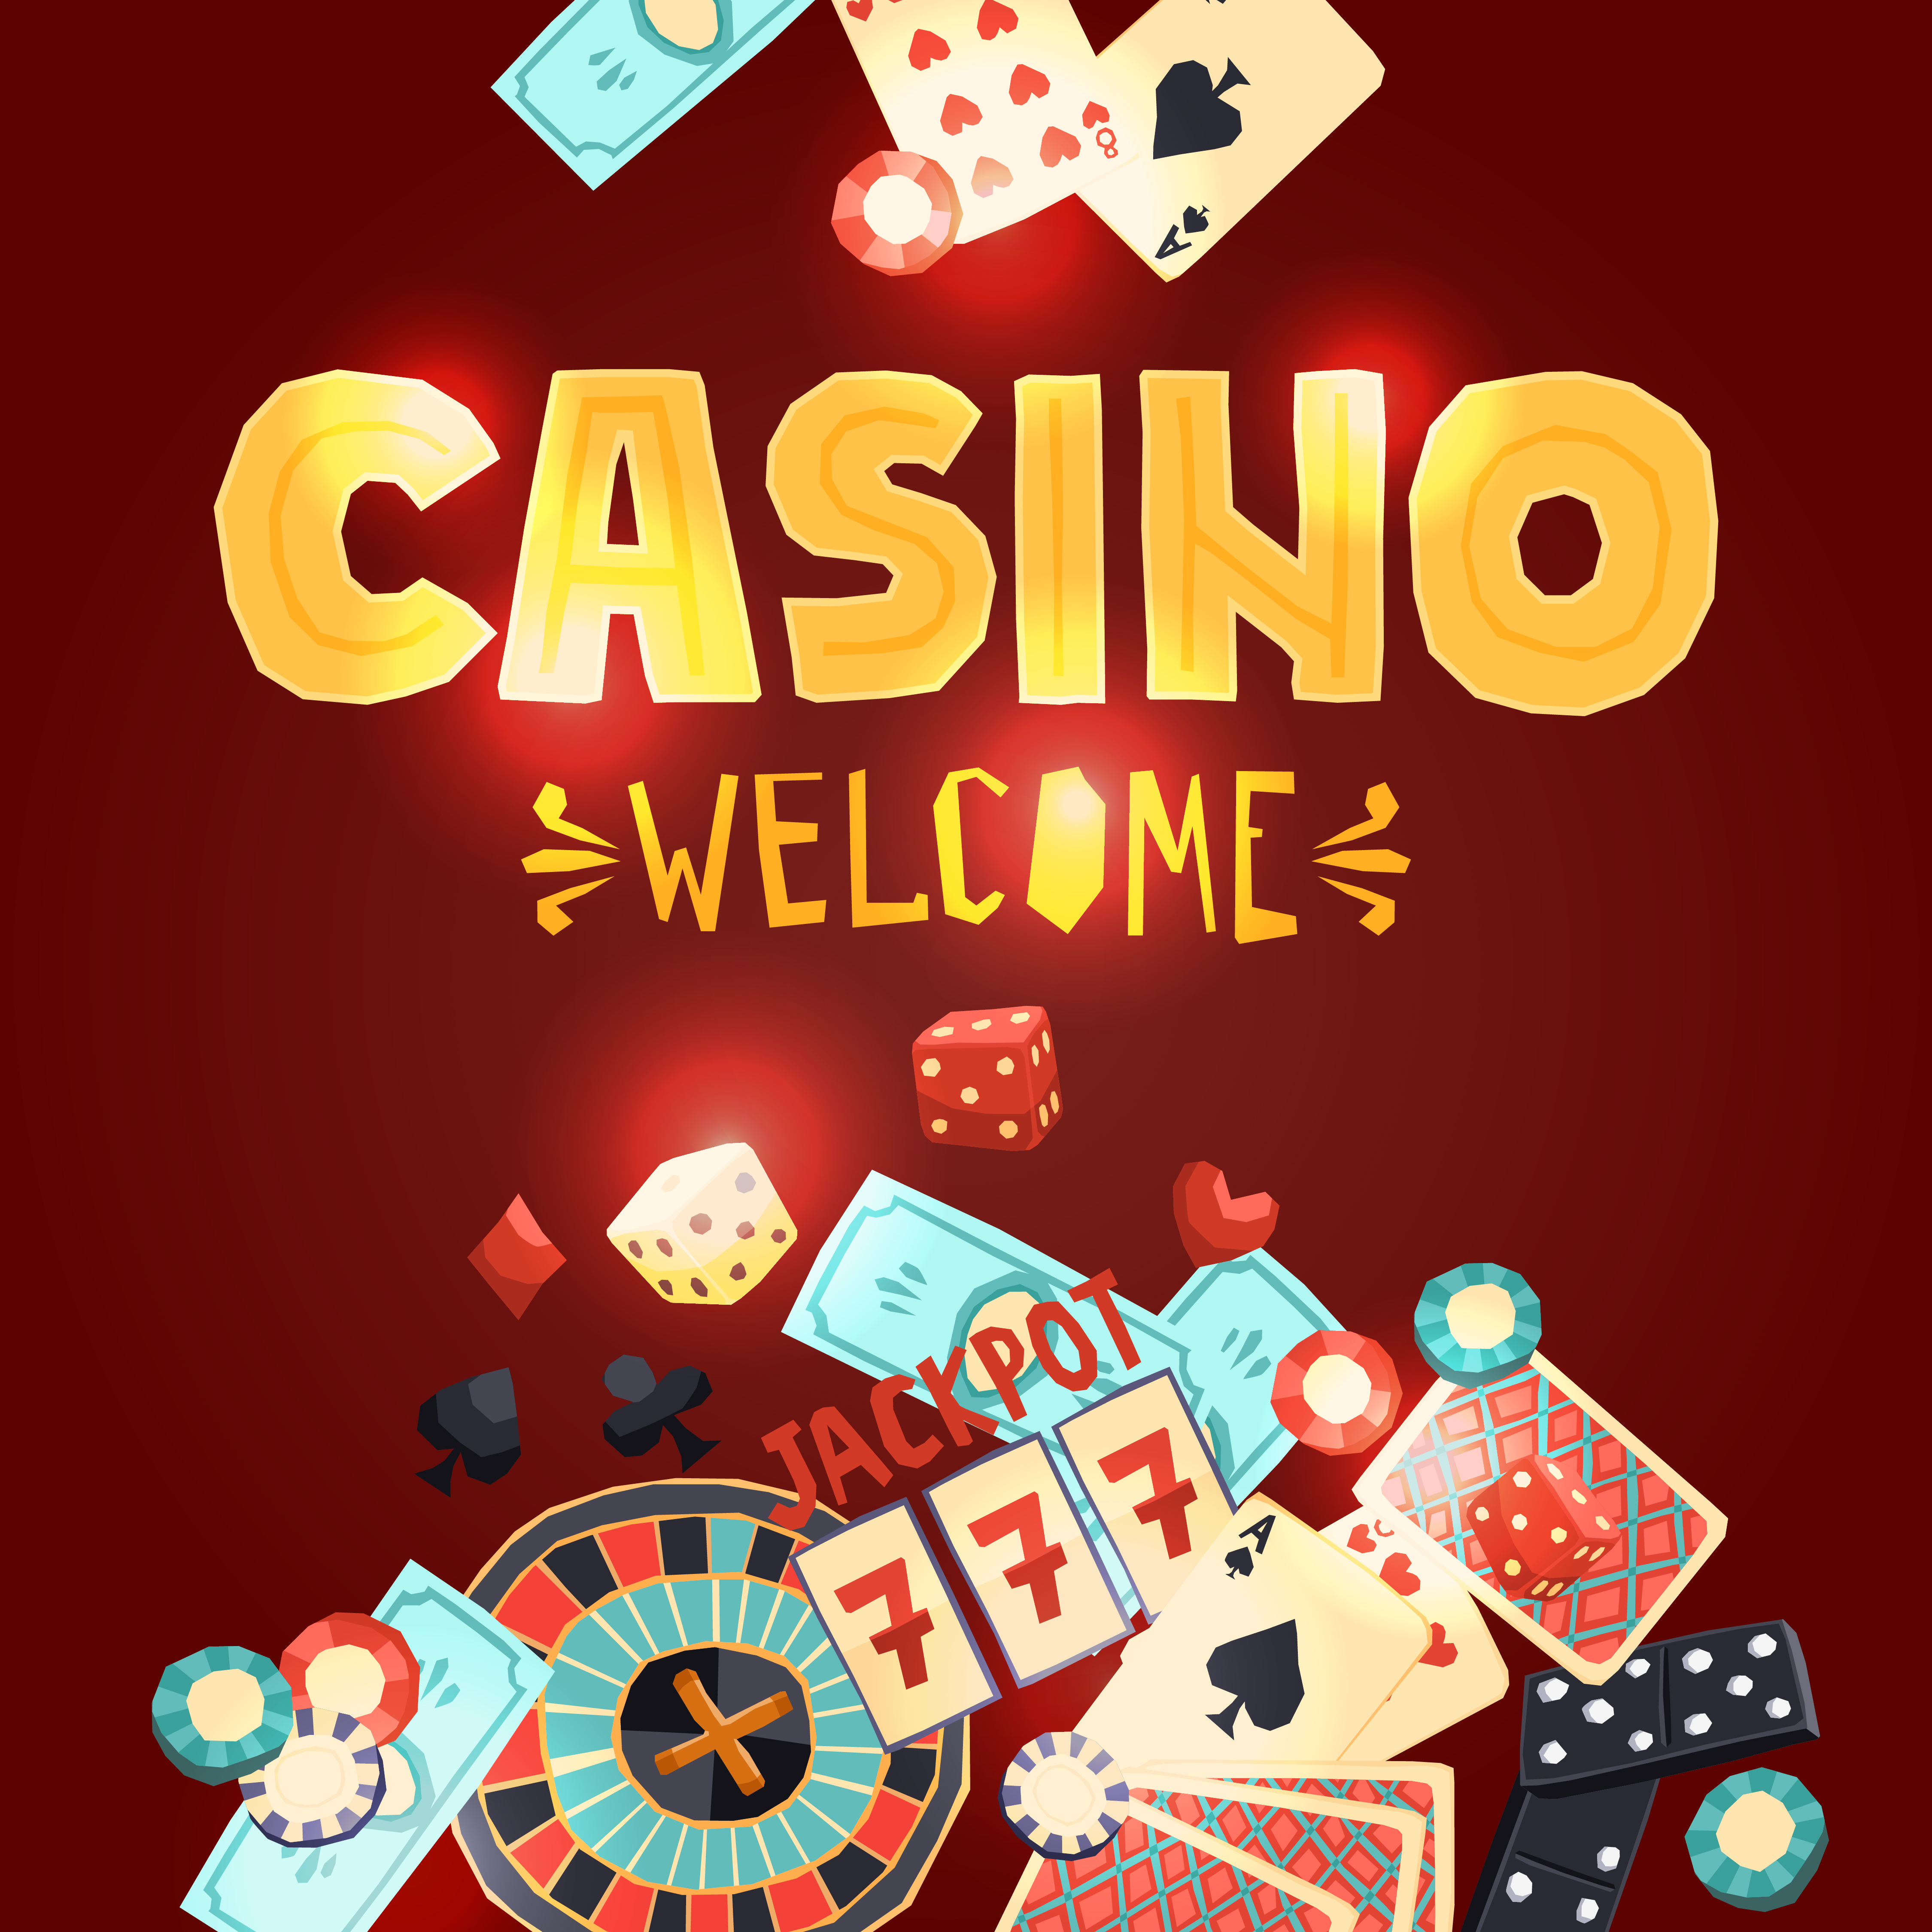 Syndicate Australian Online Casino: Feel Free To Play Casino Games and Get Rewards